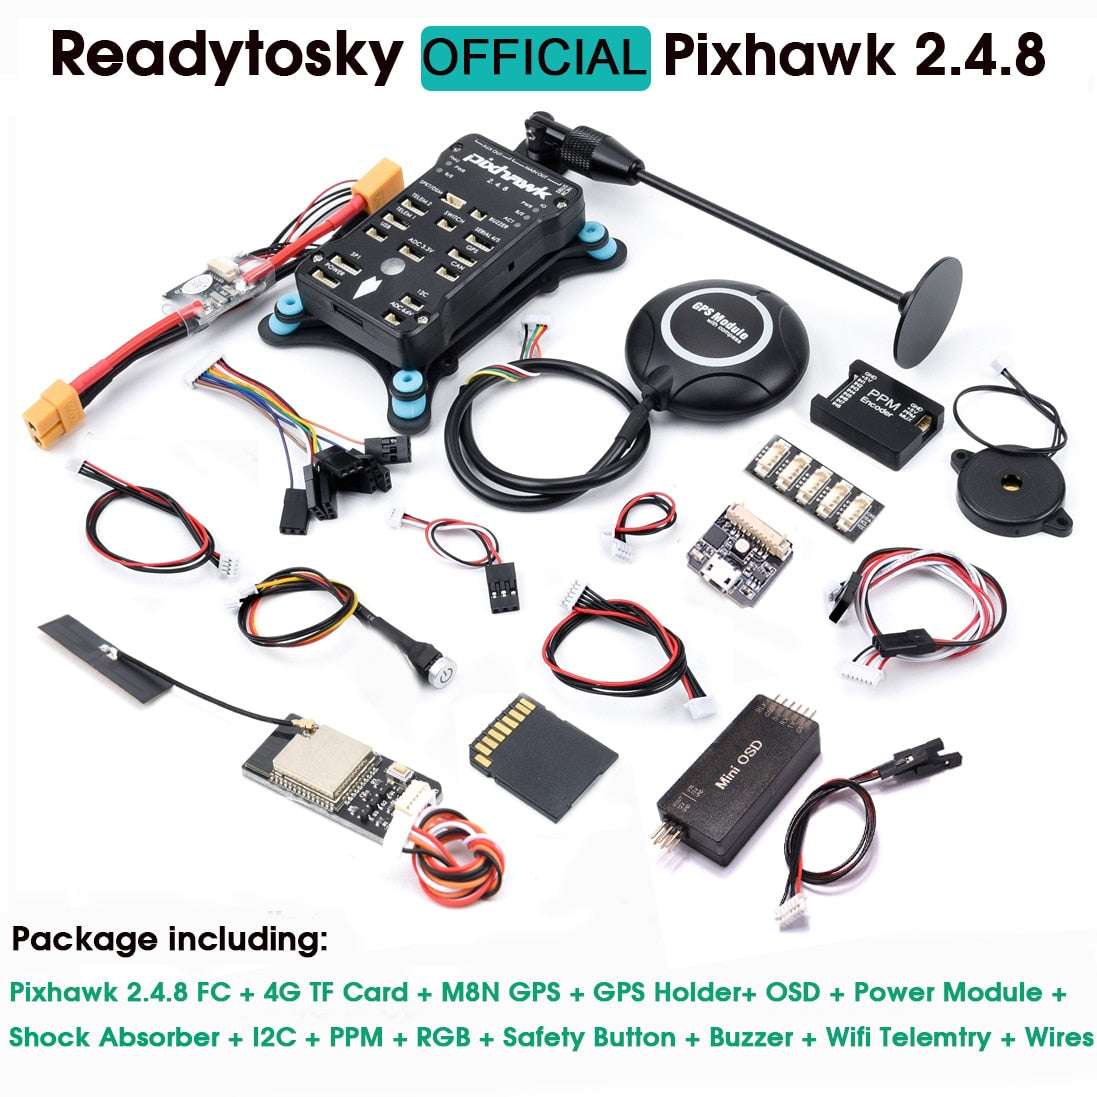 Package includes: Pixhawk 2.4.8 FC + 4G TF Card + MBN GPS